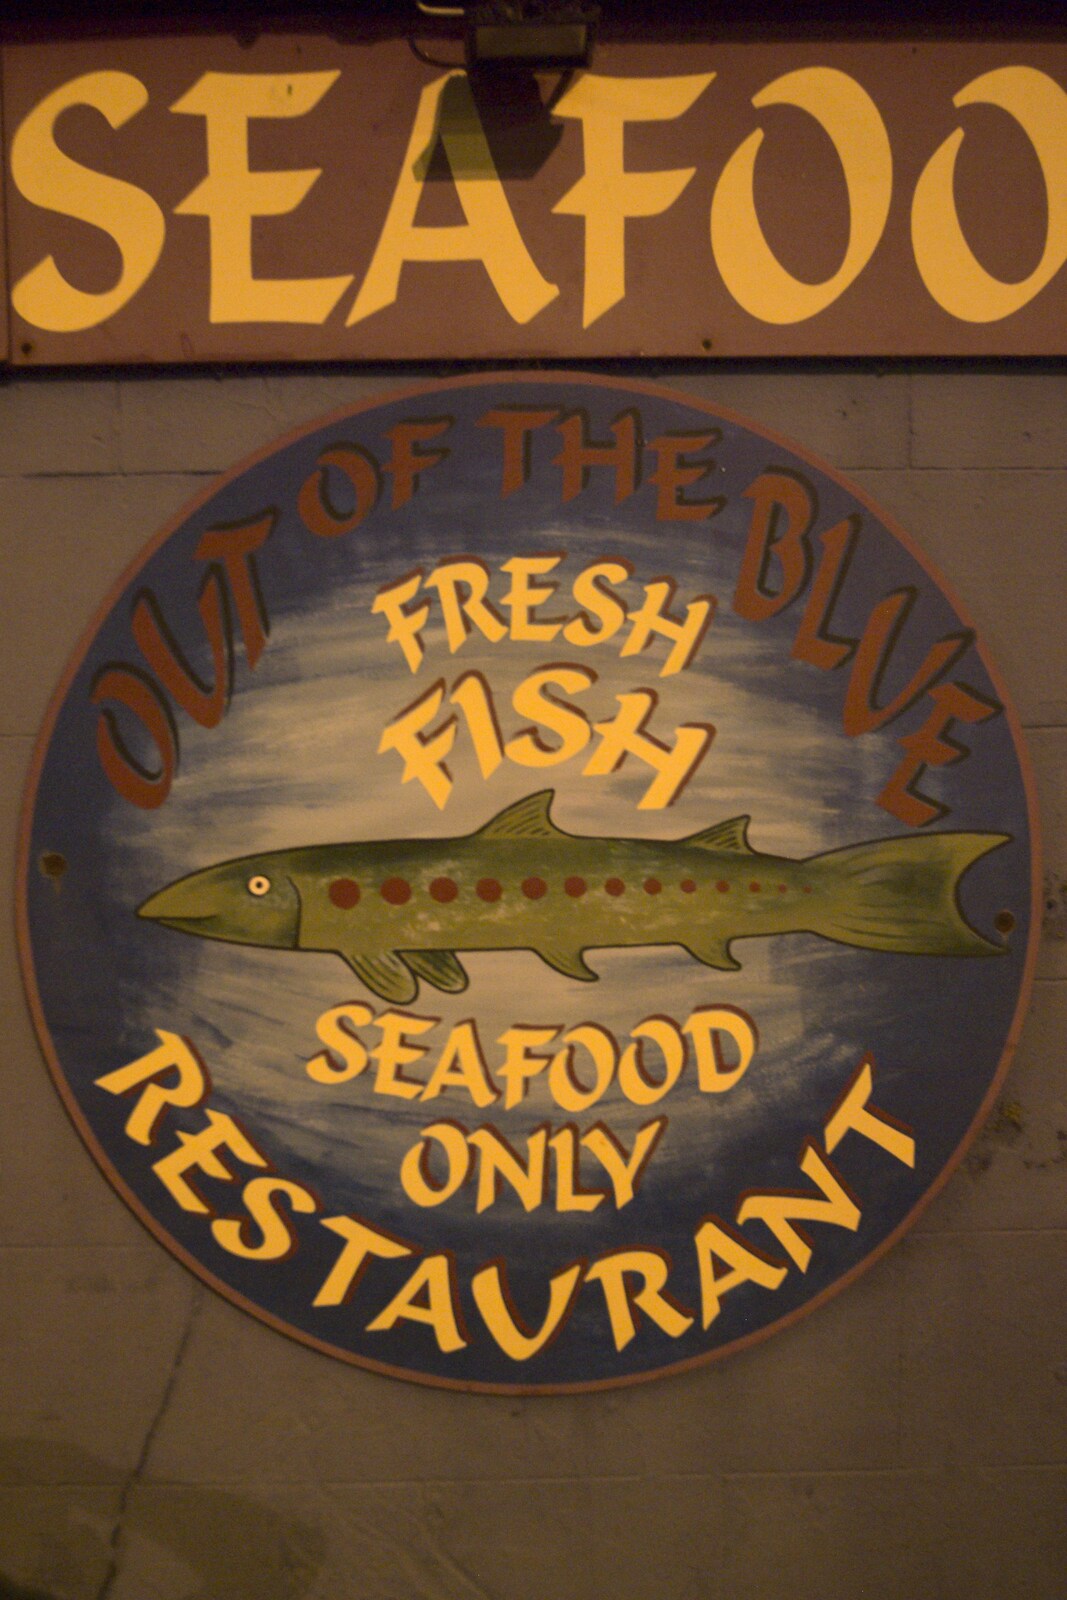 The restaurant sign from A Trip to Dingle, County Kerry, Ireland - 21st July 2009